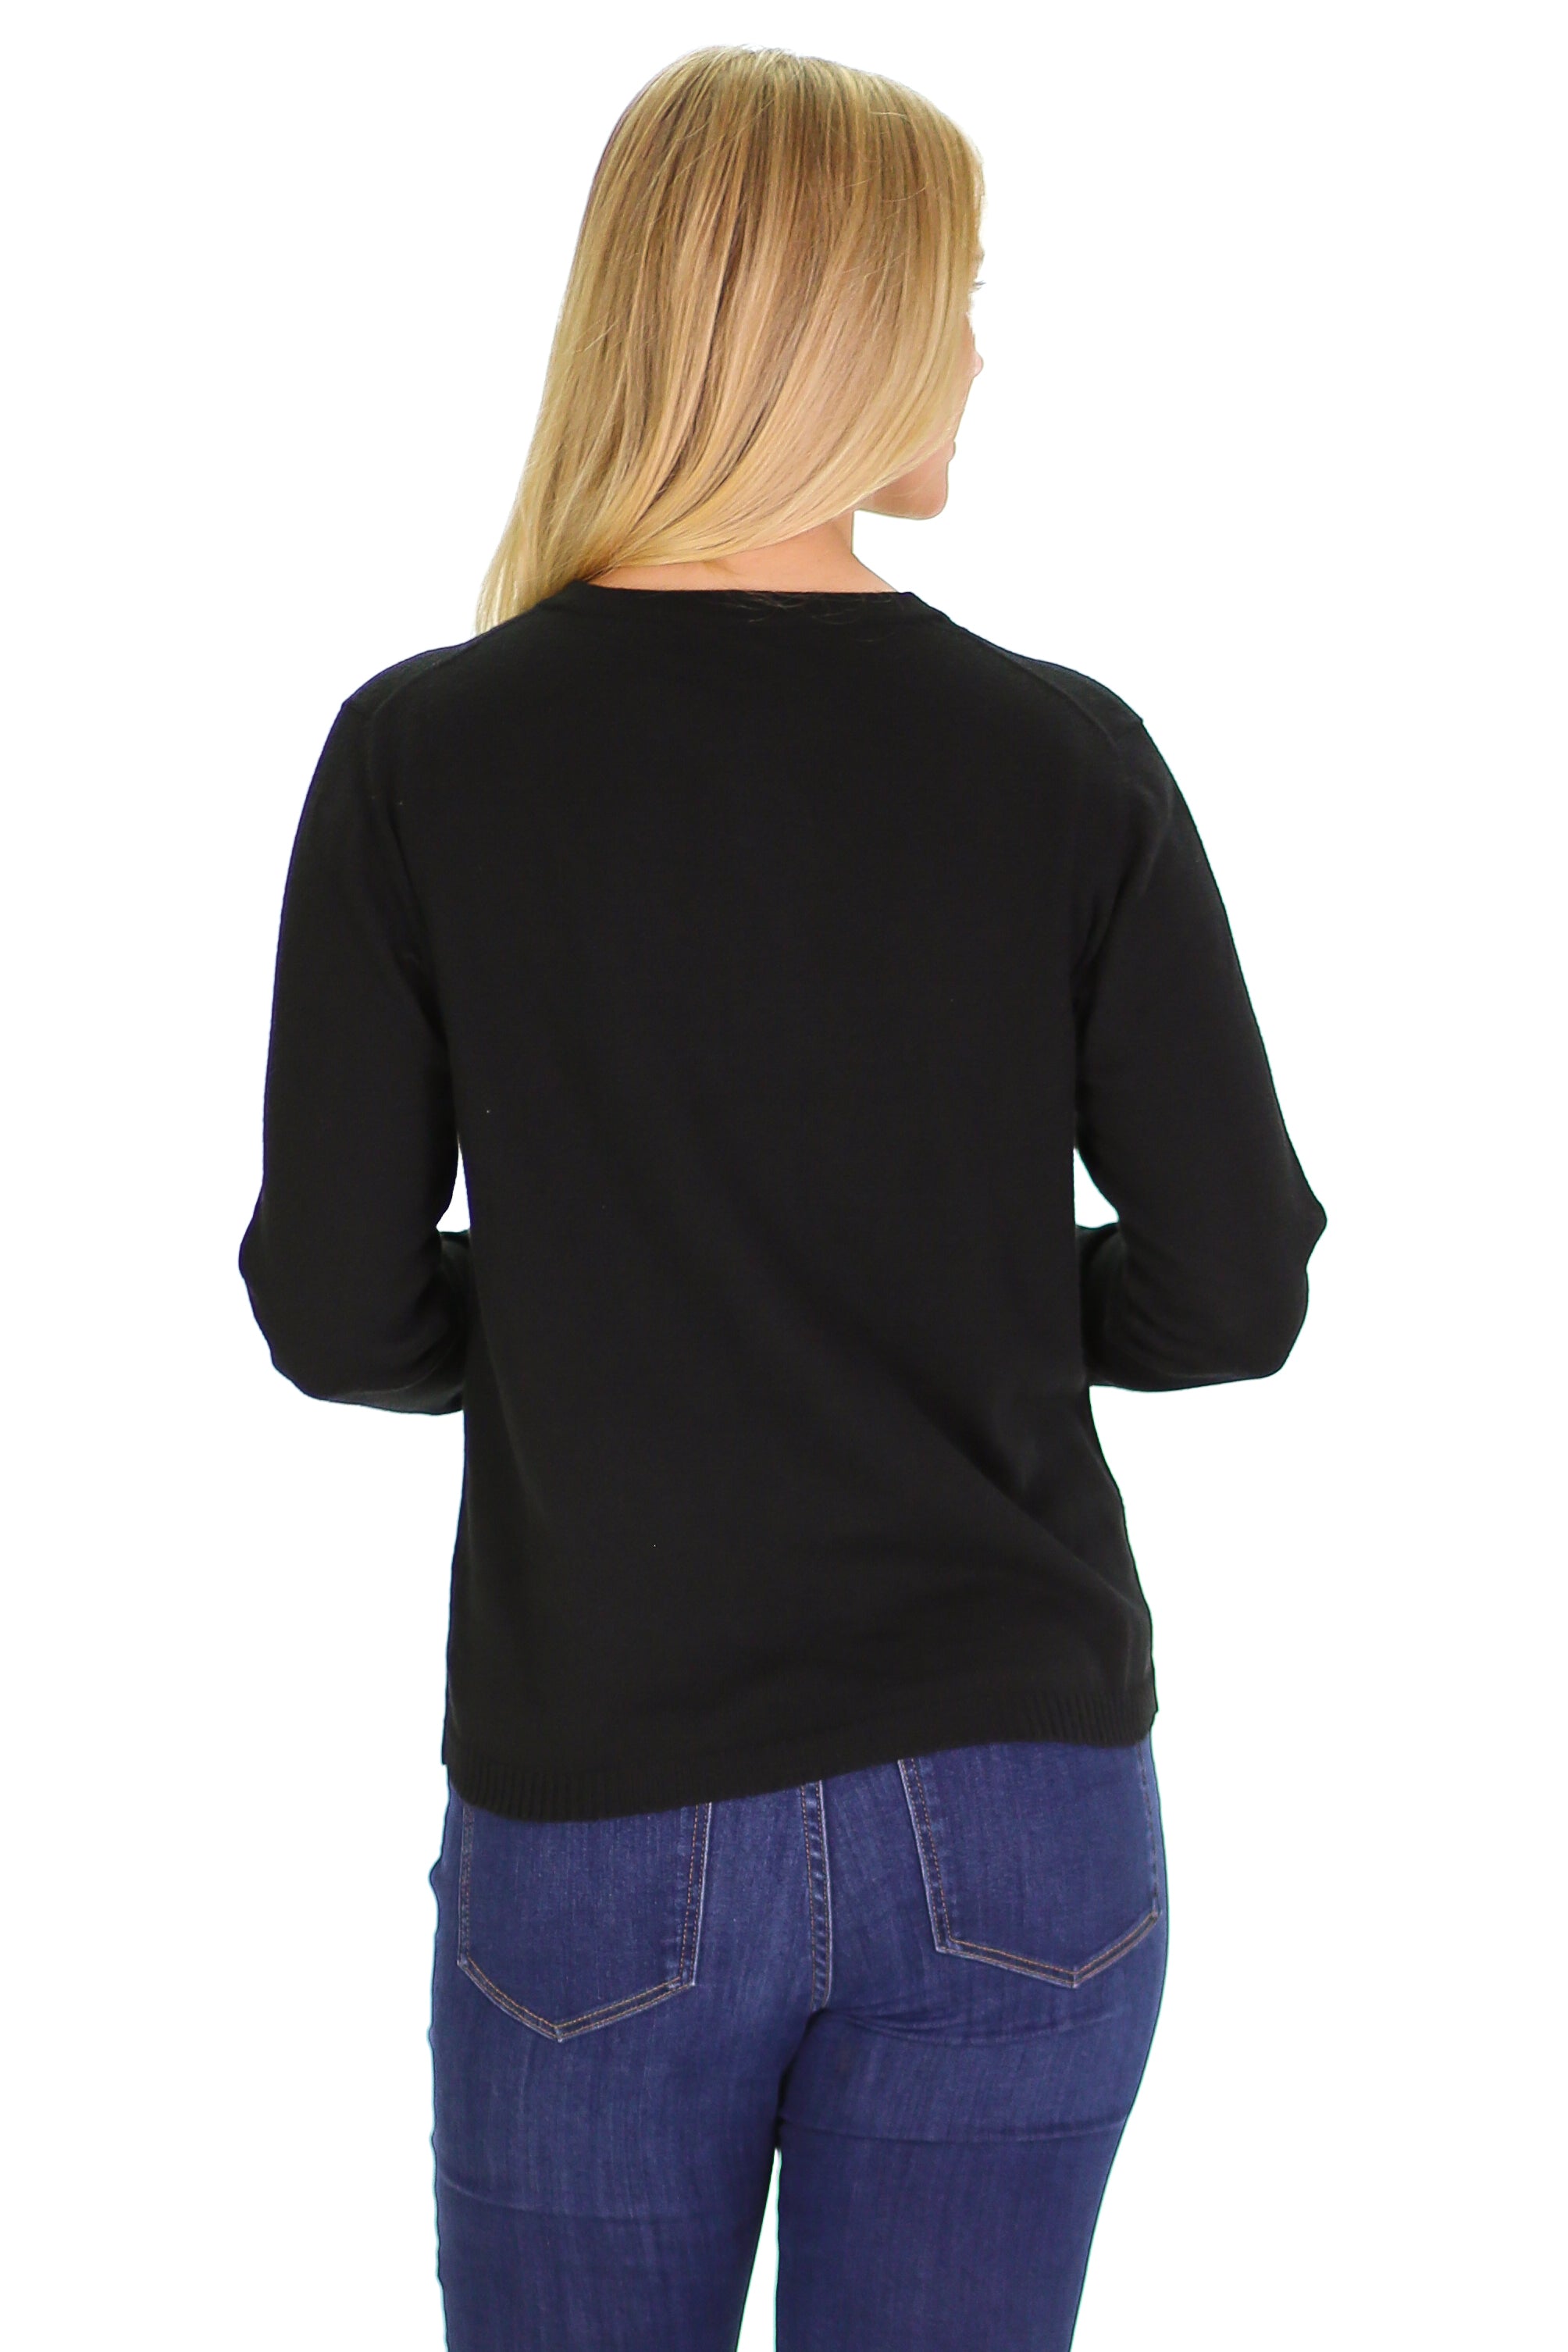 Women's Crewneck Feathered Pullover Sweater - Knox Rose™ Black L